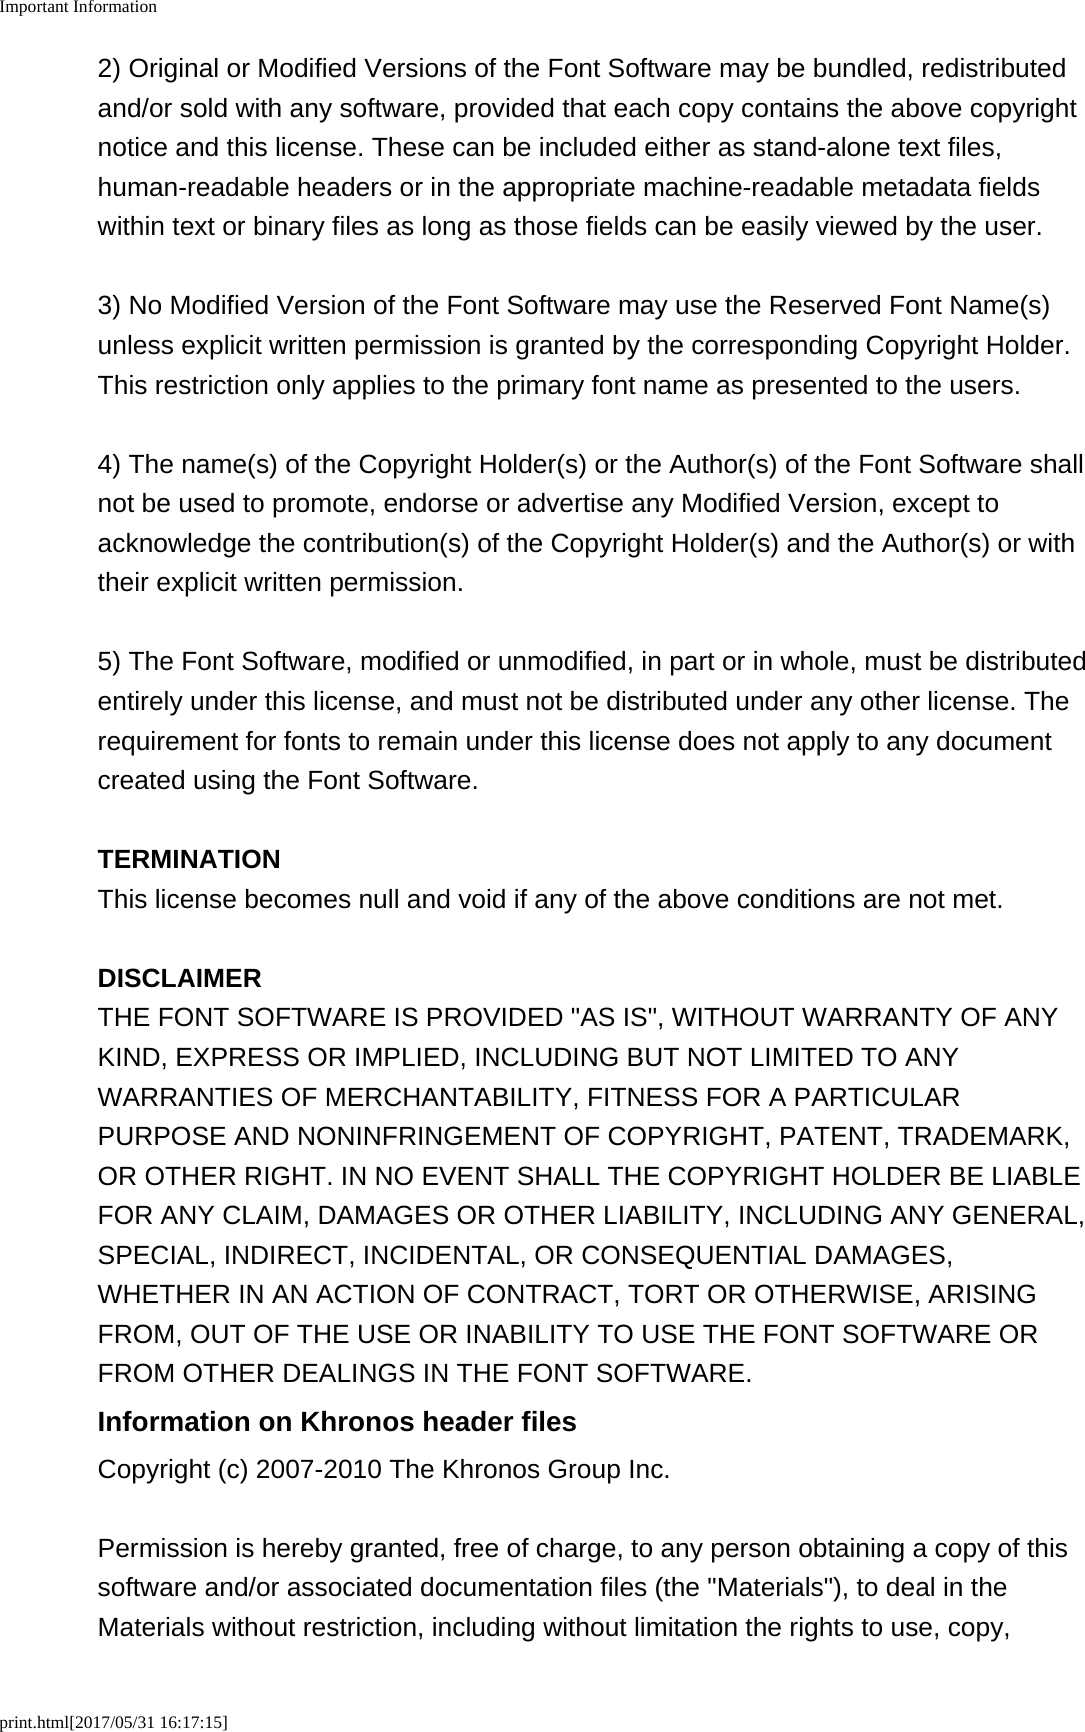 Important Informationprint.html[2017/05/31 16:17:15]2) Original or Modified Versions of the Font Software may be bundled, redistributedand/or sold with any software, provided that each copy contains the above copyrightnotice and this license. These can be included either as stand-alone text files,human-readable headers or in the appropriate machine-readable metadata fieldswithin text or binary files as long as those fields can be easily viewed by the user.3) No Modified Version of the Font Software may use the Reserved Font Name(s)unless explicit written permission is granted by the corresponding Copyright Holder.This restriction only applies to the primary font name as presented to the users.4) The name(s) of the Copyright Holder(s) or the Author(s) of the Font Software shallnot be used to promote, endorse or advertise any Modified Version, except toacknowledge the contribution(s) of the Copyright Holder(s) and the Author(s) or withtheir explicit written permission.5) The Font Software, modified or unmodified, in part or in whole, must be distributedentirely under this license, and must not be distributed under any other license. Therequirement for fonts to remain under this license does not apply to any documentcreated using the Font Software.TERMINATIONThis license becomes null and void if any of the above conditions are not met.DISCLAIMERTHE FONT SOFTWARE IS PROVIDED &quot;AS IS&quot;, WITHOUT WARRANTY OF ANYKIND, EXPRESS OR IMPLIED, INCLUDING BUT NOT LIMITED TO ANYWARRANTIES OF MERCHANTABILITY, FITNESS FOR A PARTICULARPURPOSE AND NONINFRINGEMENT OF COPYRIGHT, PATENT, TRADEMARK,OR OTHER RIGHT. IN NO EVENT SHALL THE COPYRIGHT HOLDER BE LIABLEFOR ANY CLAIM, DAMAGES OR OTHER LIABILITY, INCLUDING ANY GENERAL,SPECIAL, INDIRECT, INCIDENTAL, OR CONSEQUENTIAL DAMAGES,WHETHER IN AN ACTION OF CONTRACT, TORT OR OTHERWISE, ARISINGFROM, OUT OF THE USE OR INABILITY TO USE THE FONT SOFTWARE ORFROM OTHER DEALINGS IN THE FONT SOFTWARE.Information on Khronos header filesCopyright (c) 2007-2010 The Khronos Group Inc.Permission is hereby granted, free of charge, to any person obtaining a copy of thissoftware and/or associated documentation files (the &quot;Materials&quot;), to deal in theMaterials without restriction, including without limitation the rights to use, copy,